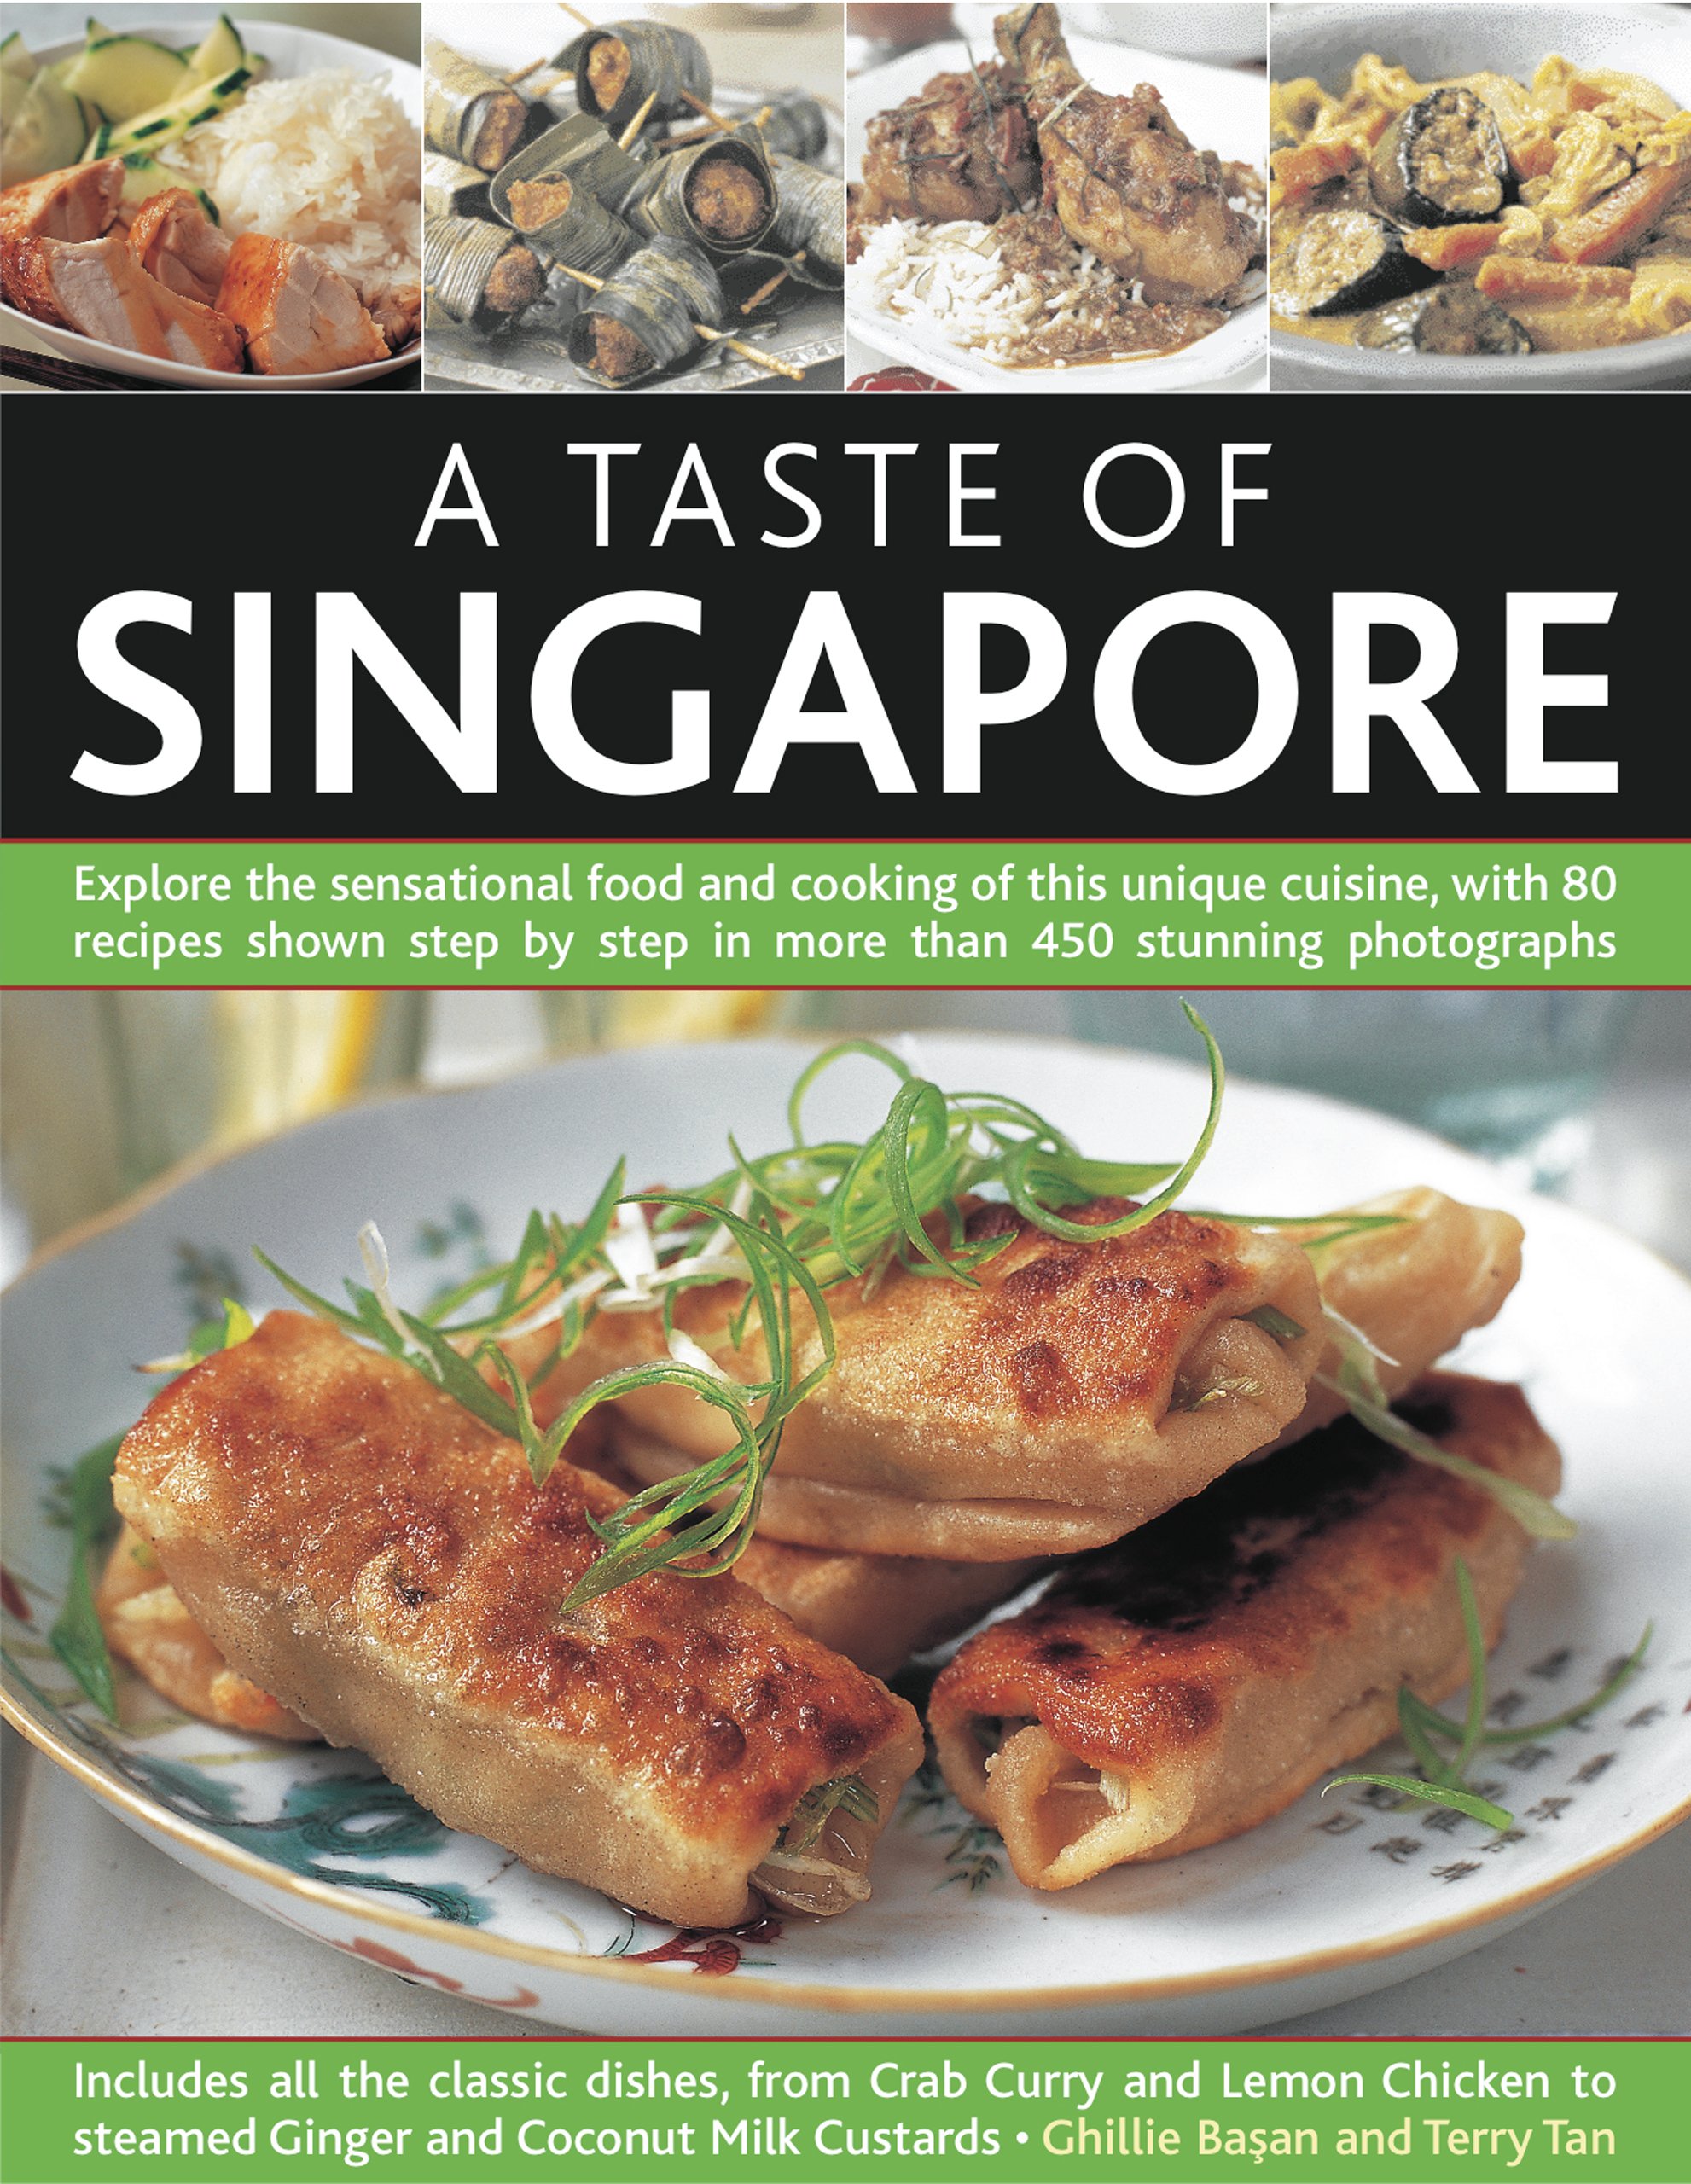 A Taste of Singapore :  Explore The Sensational Food and Cooking of This Unique Cuisine, with 80 Recipes Shown Step by Step In More Than 450 Stunning Photographs